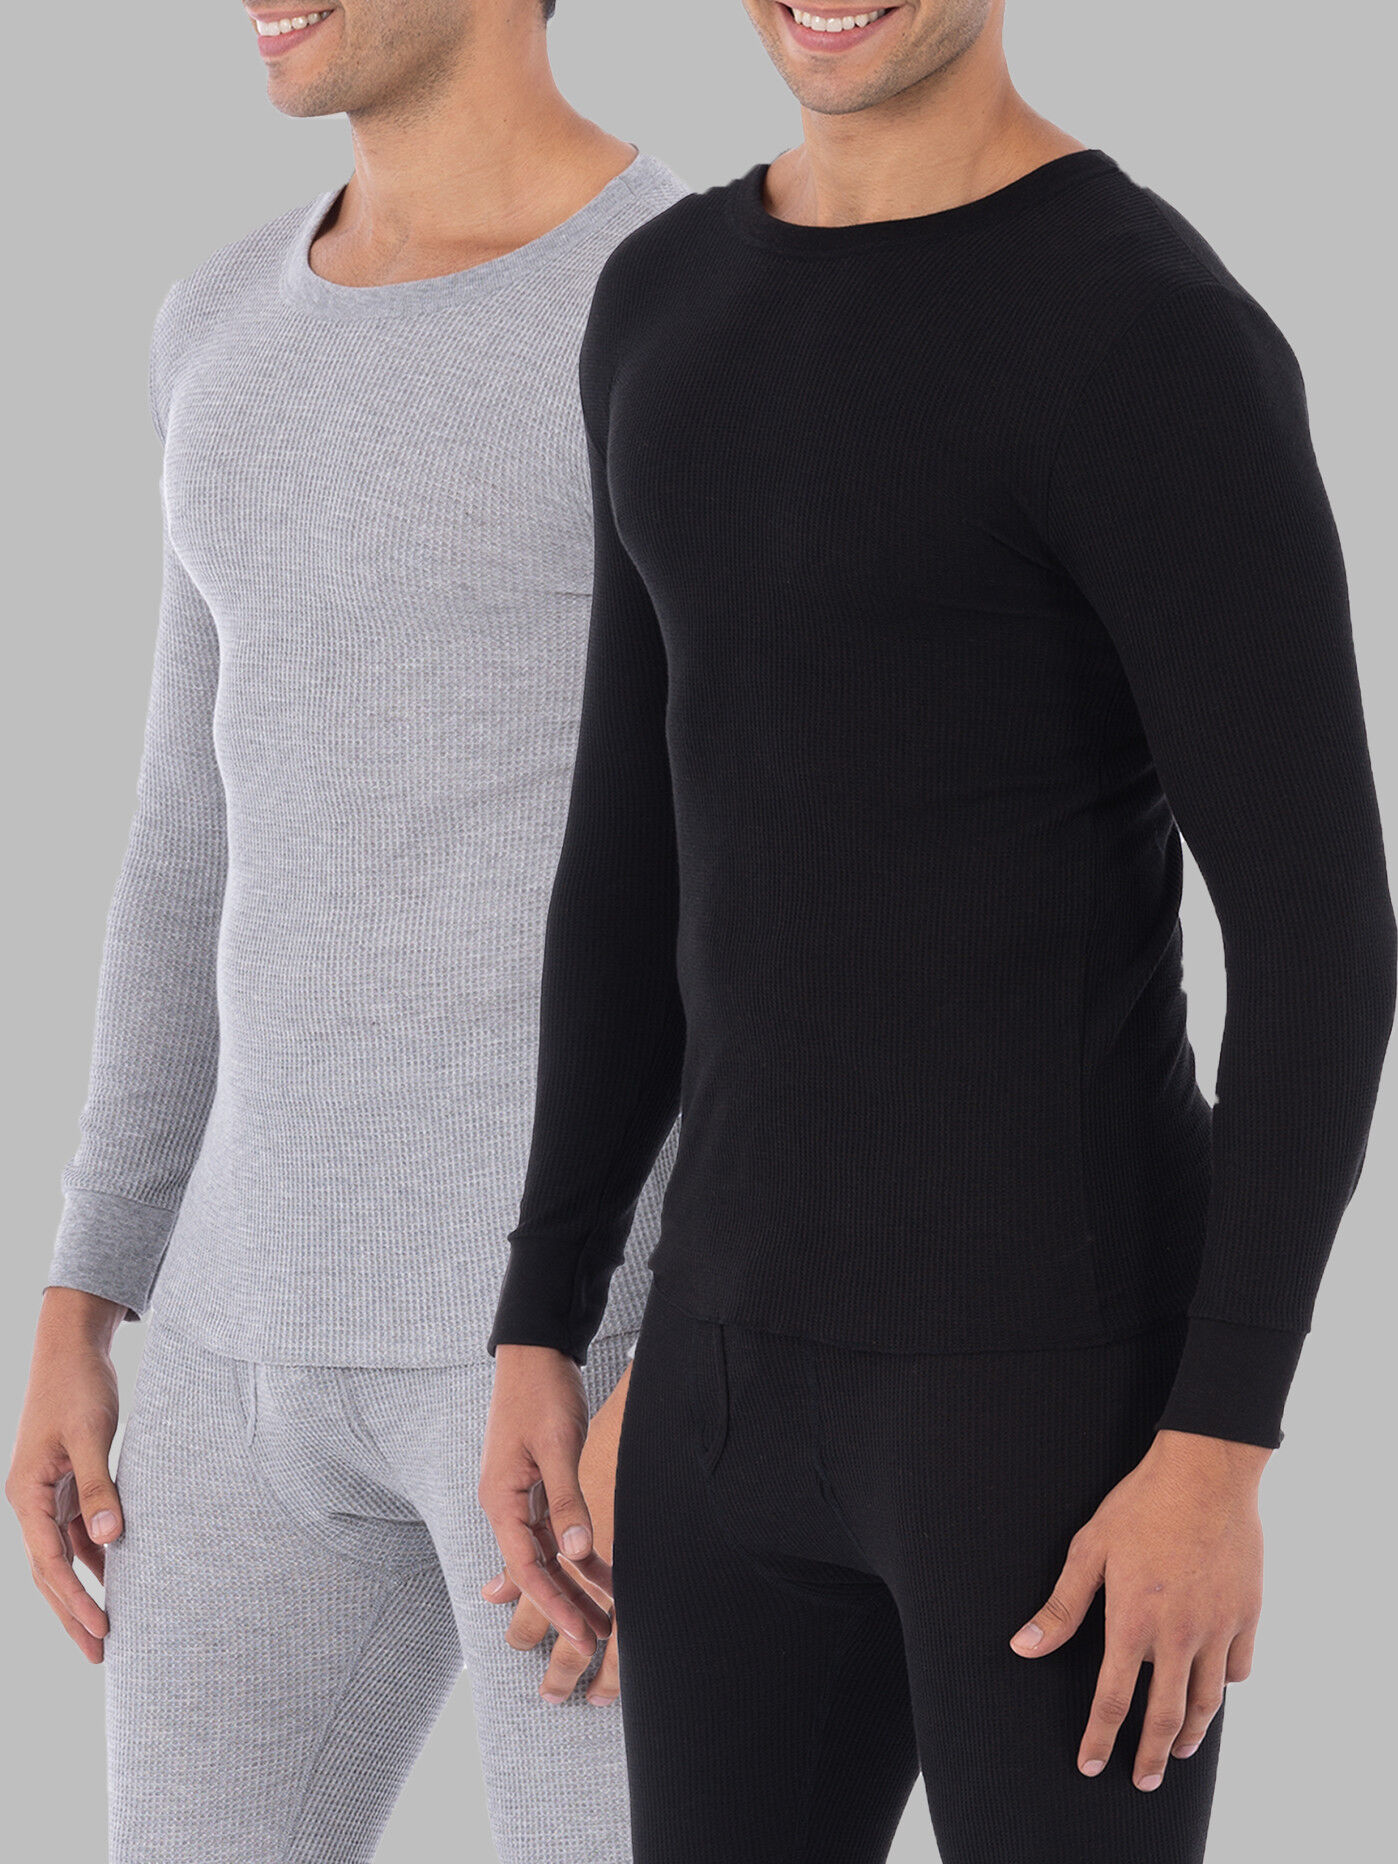 Thermals & Sleepwear | Thermal Tops & Bottoms for Men and Women